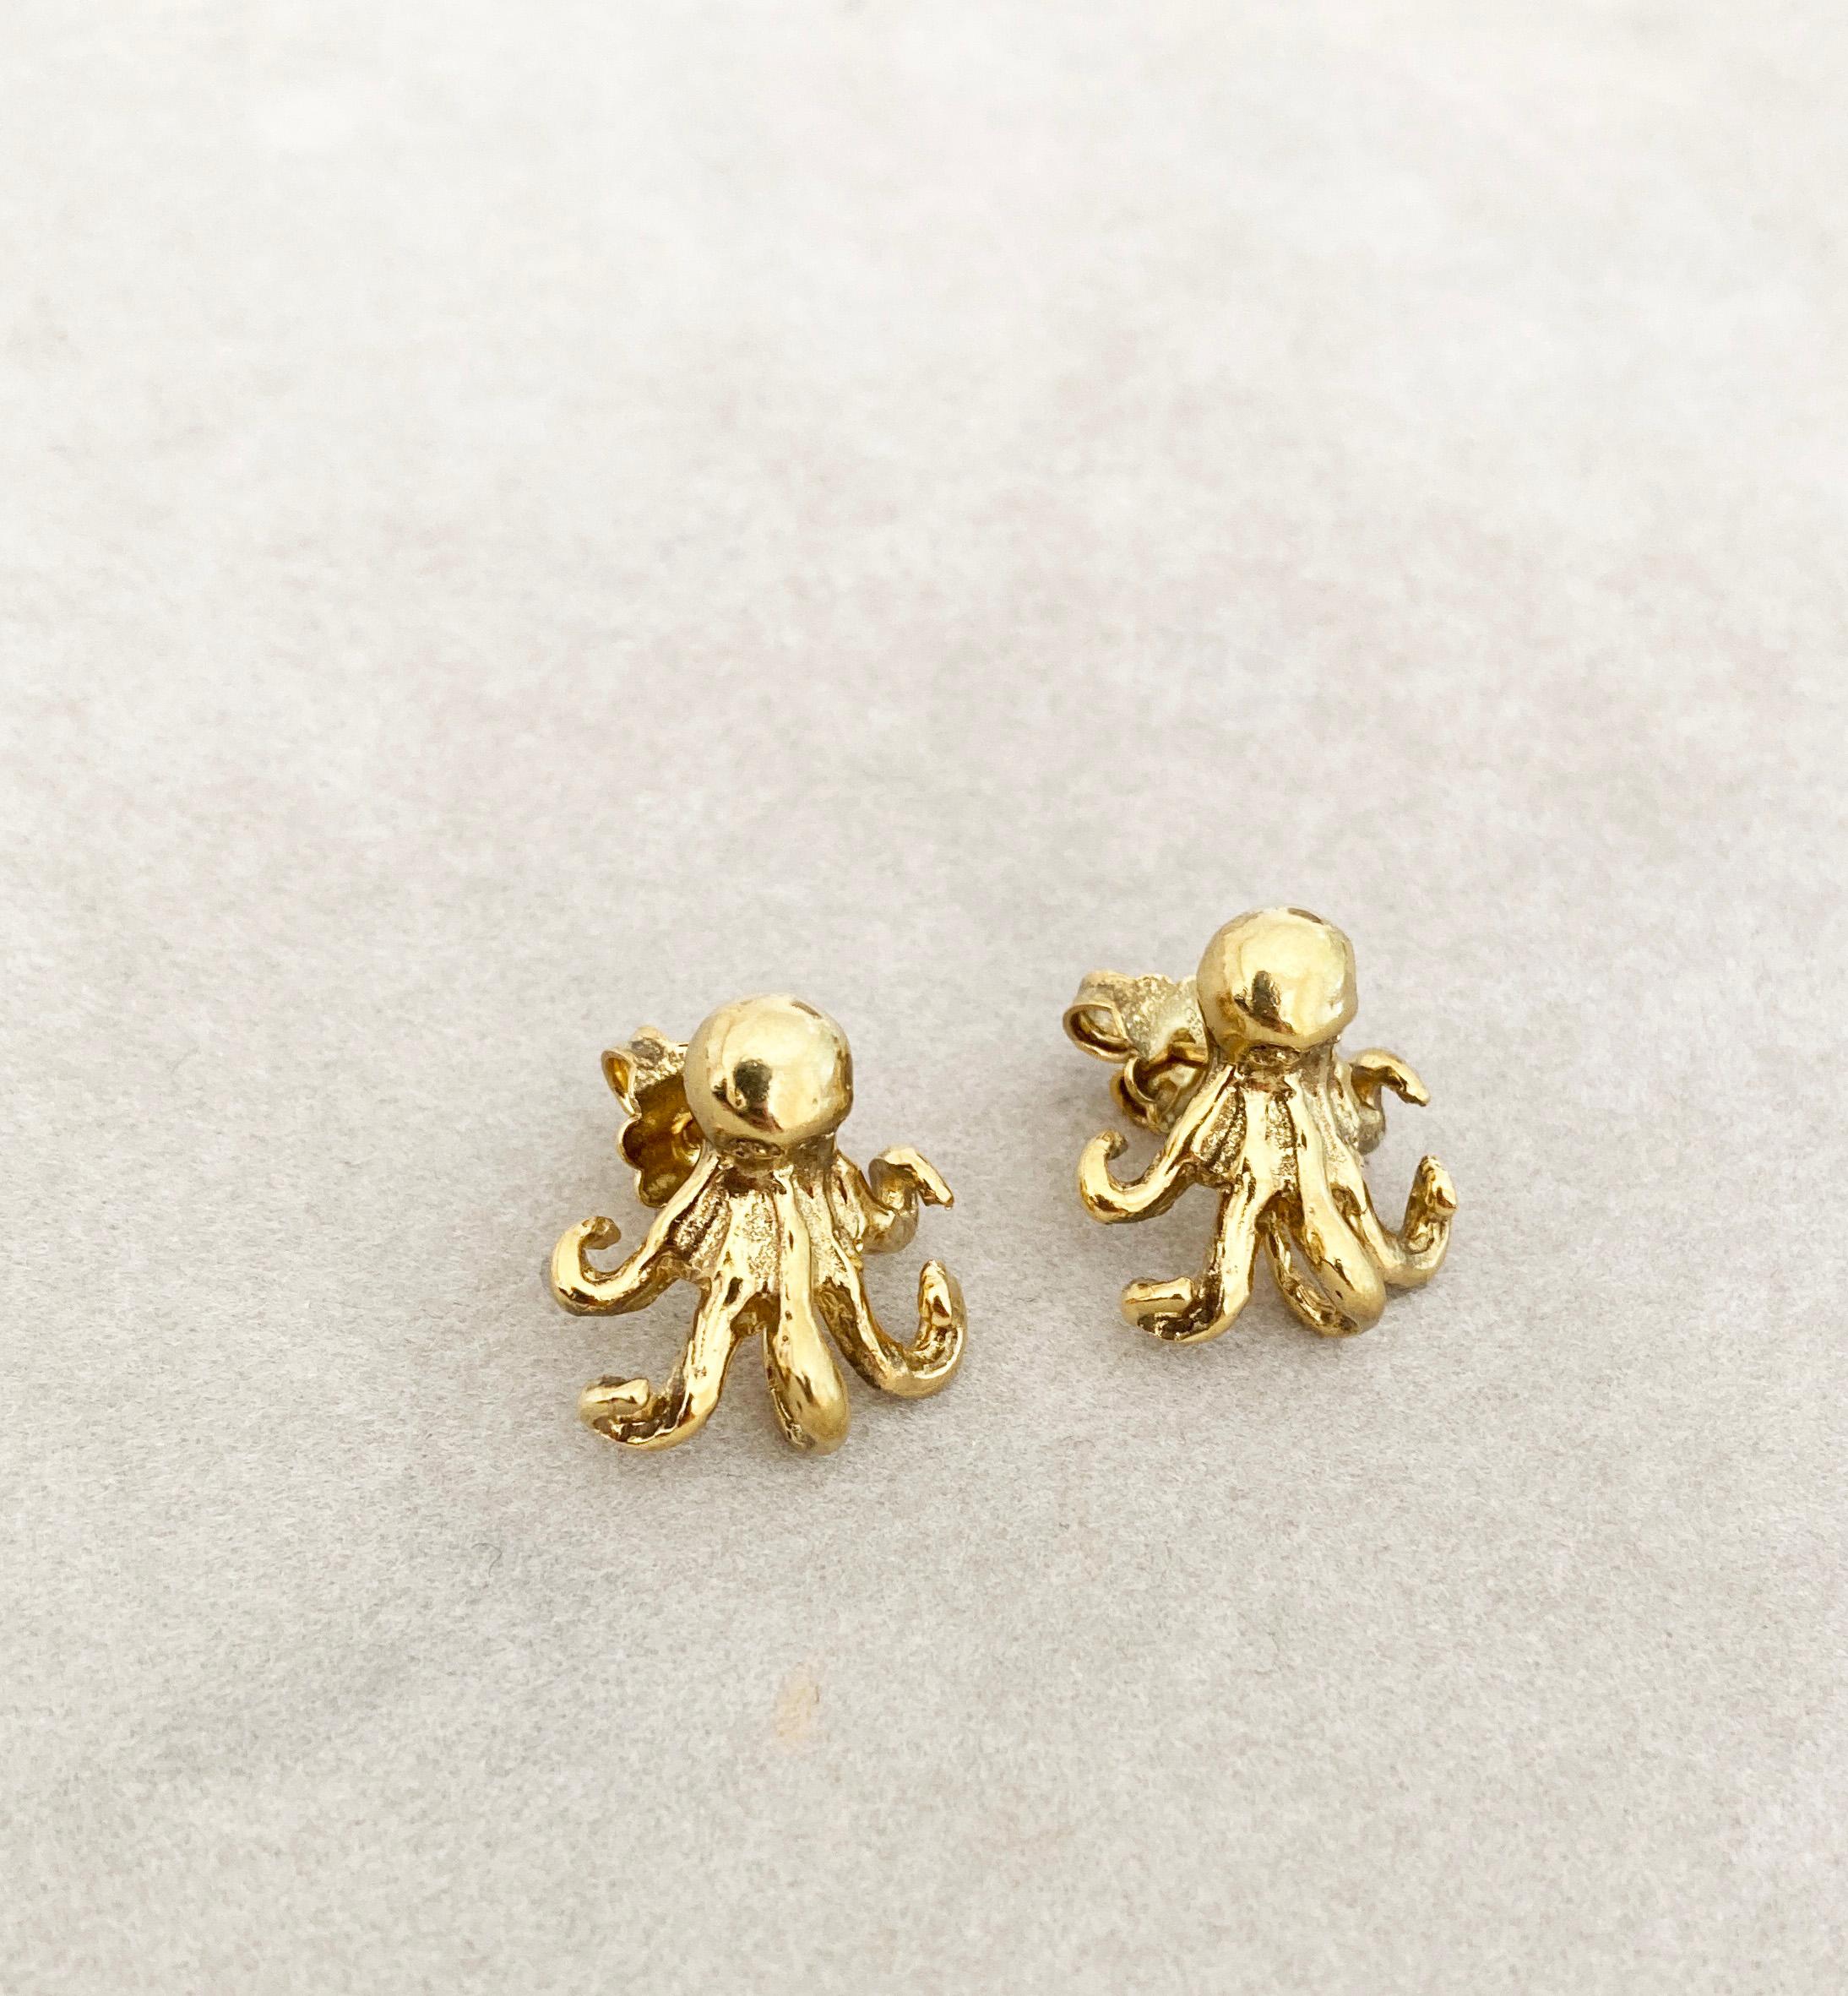 Rossella Ugolini 18K Yellow Gold Handcrafted Octopus Stud Earrings For Sale 2